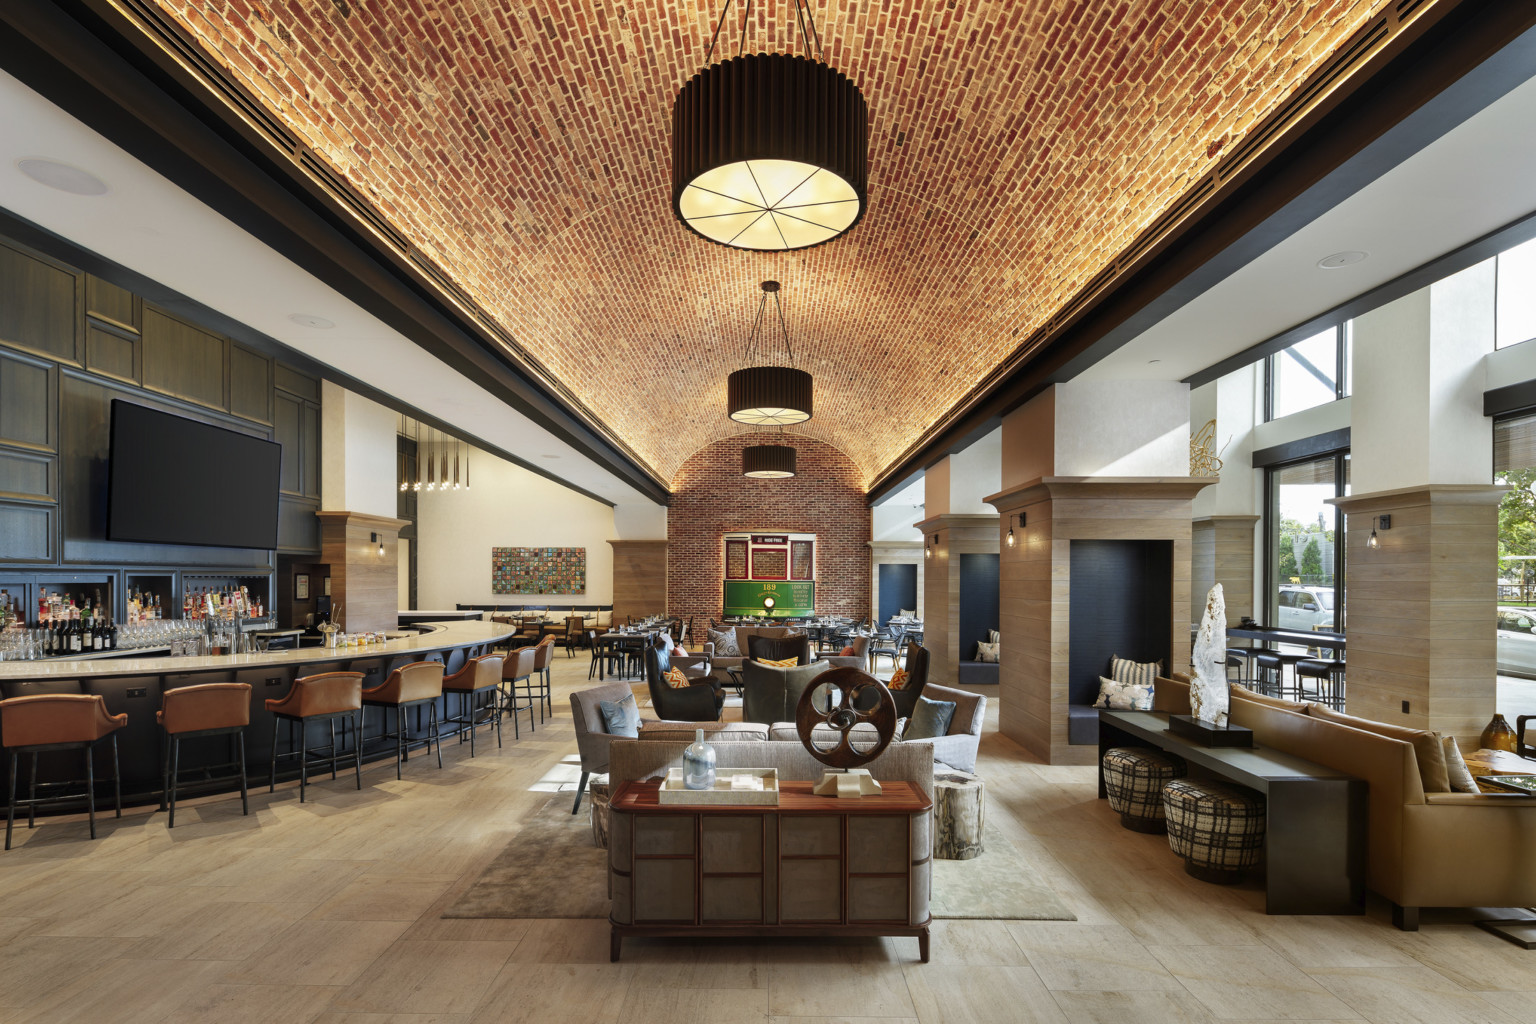 Lounge and bar at Canopy by Hilton Dallas Uptown with illuminated tile ceiling and large shaded pendant lamps, street view